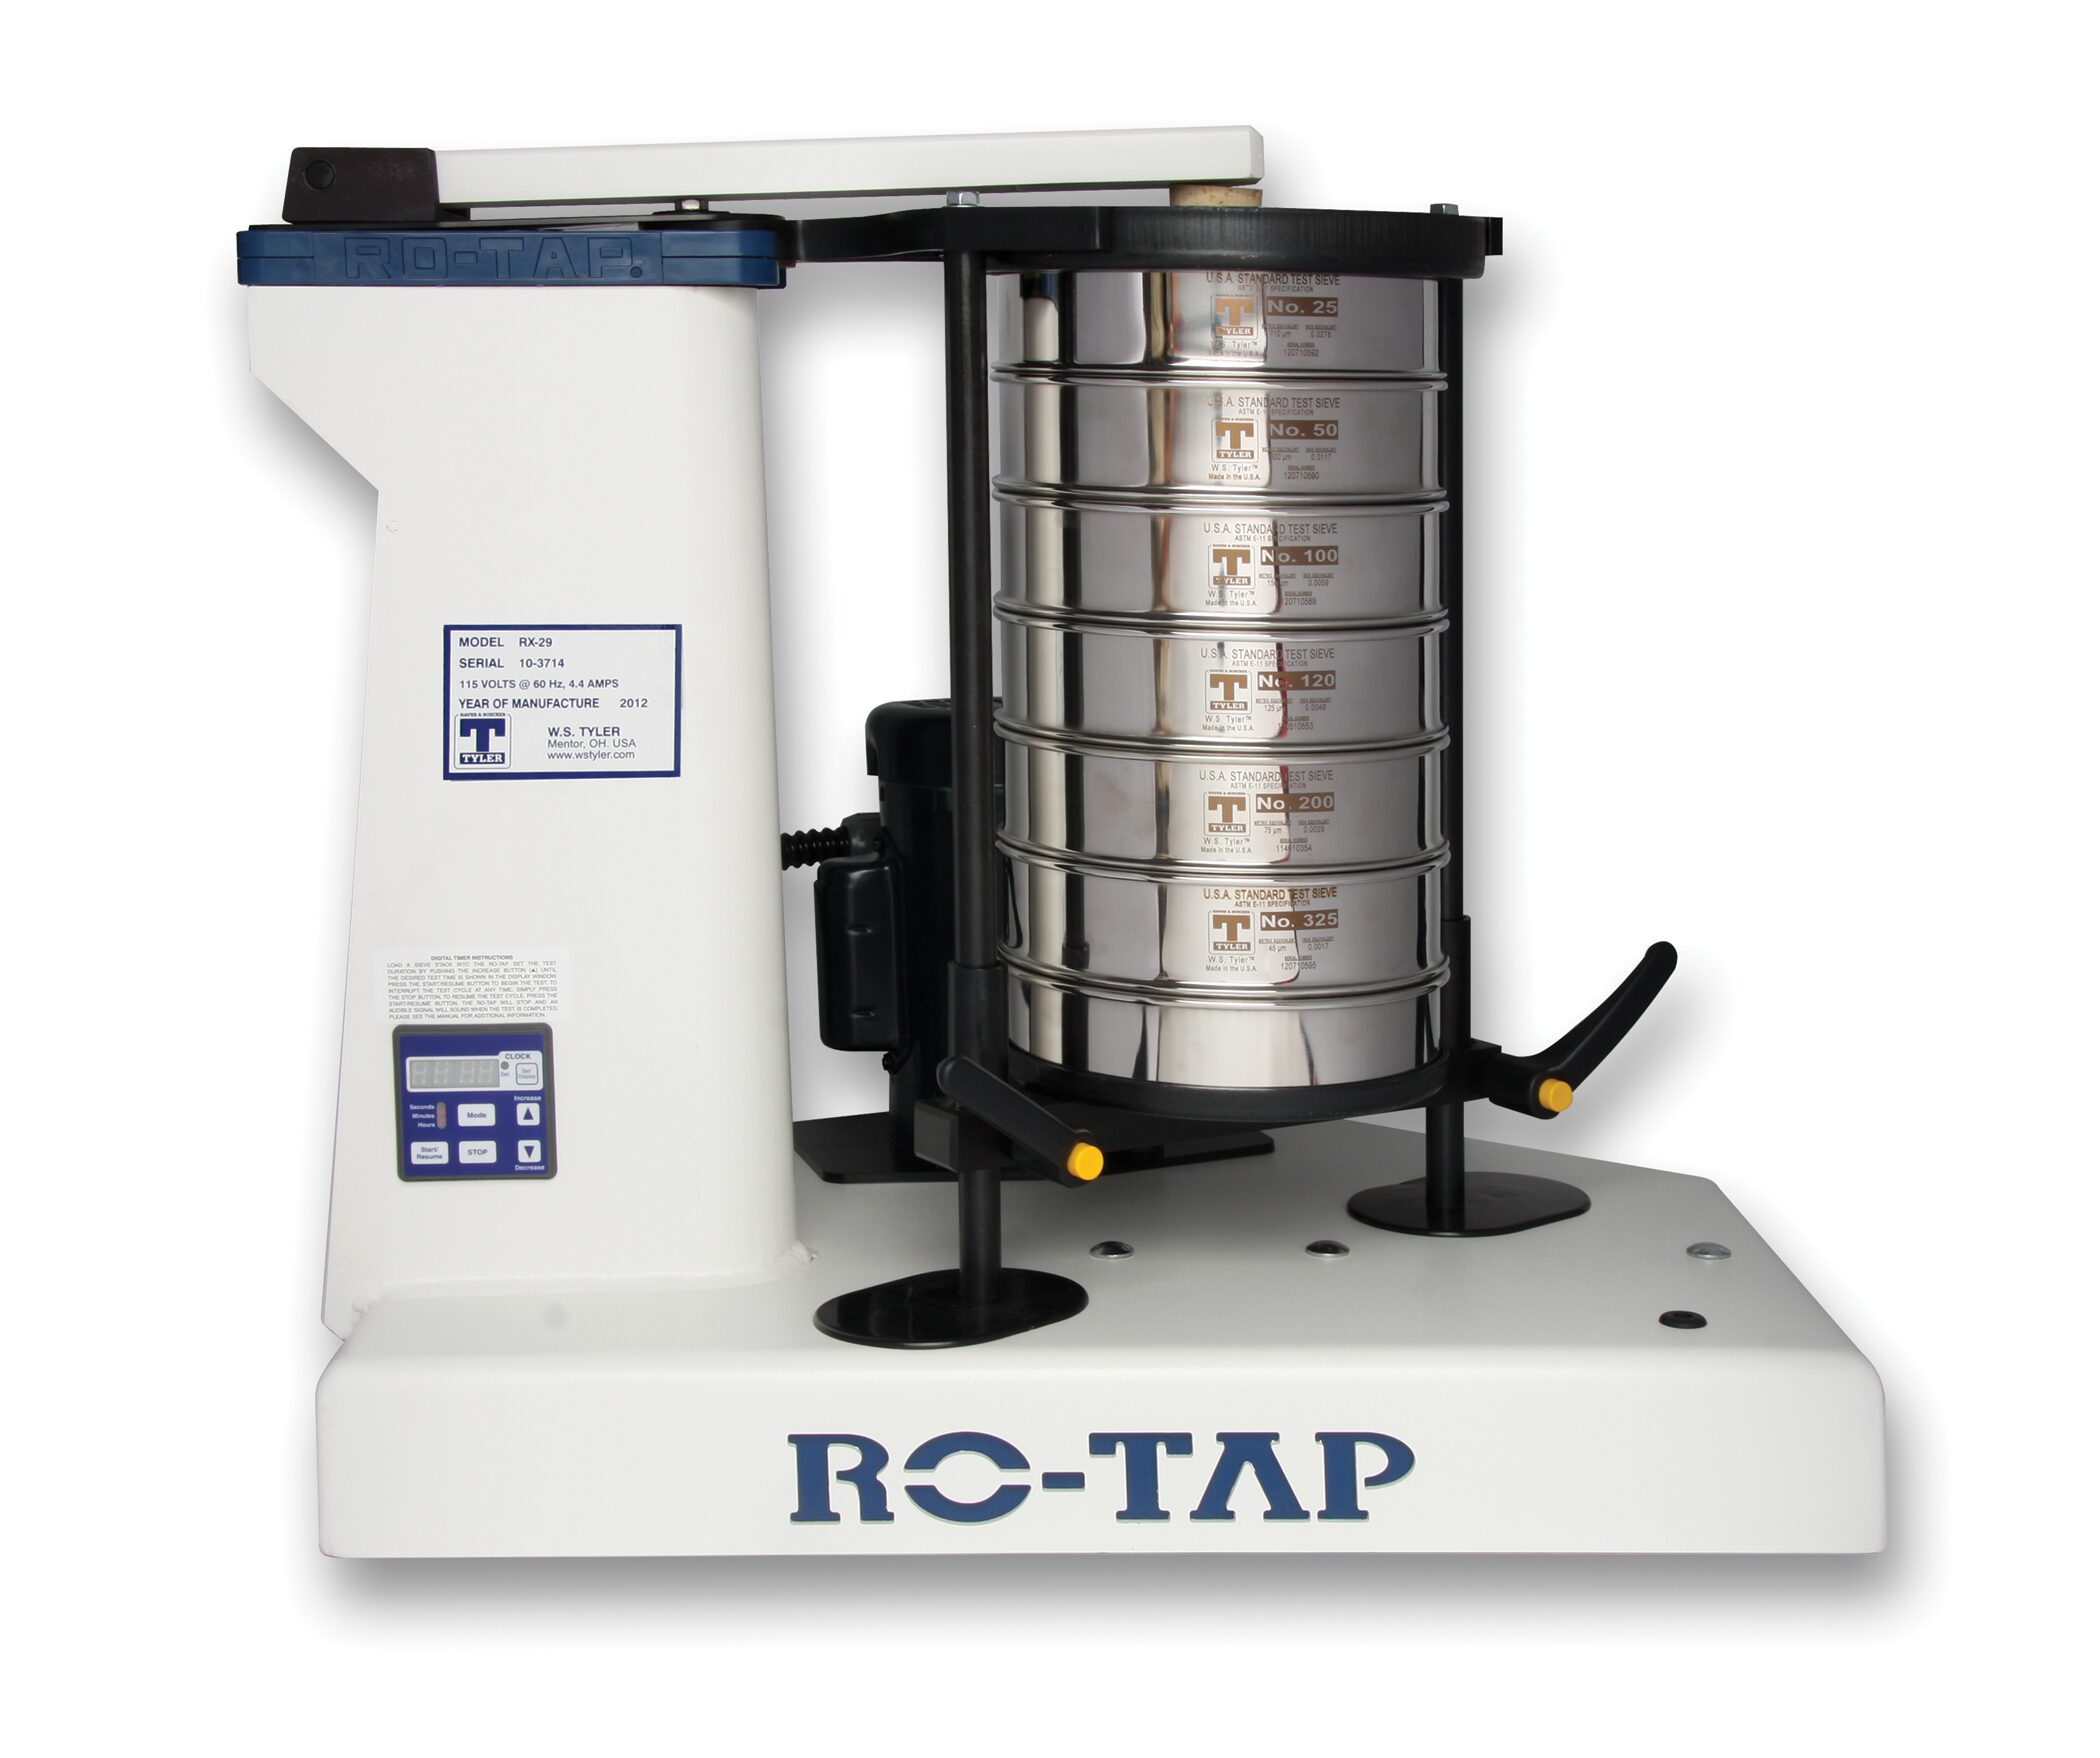 RoTap Sieve Shaker for Particle Analysis